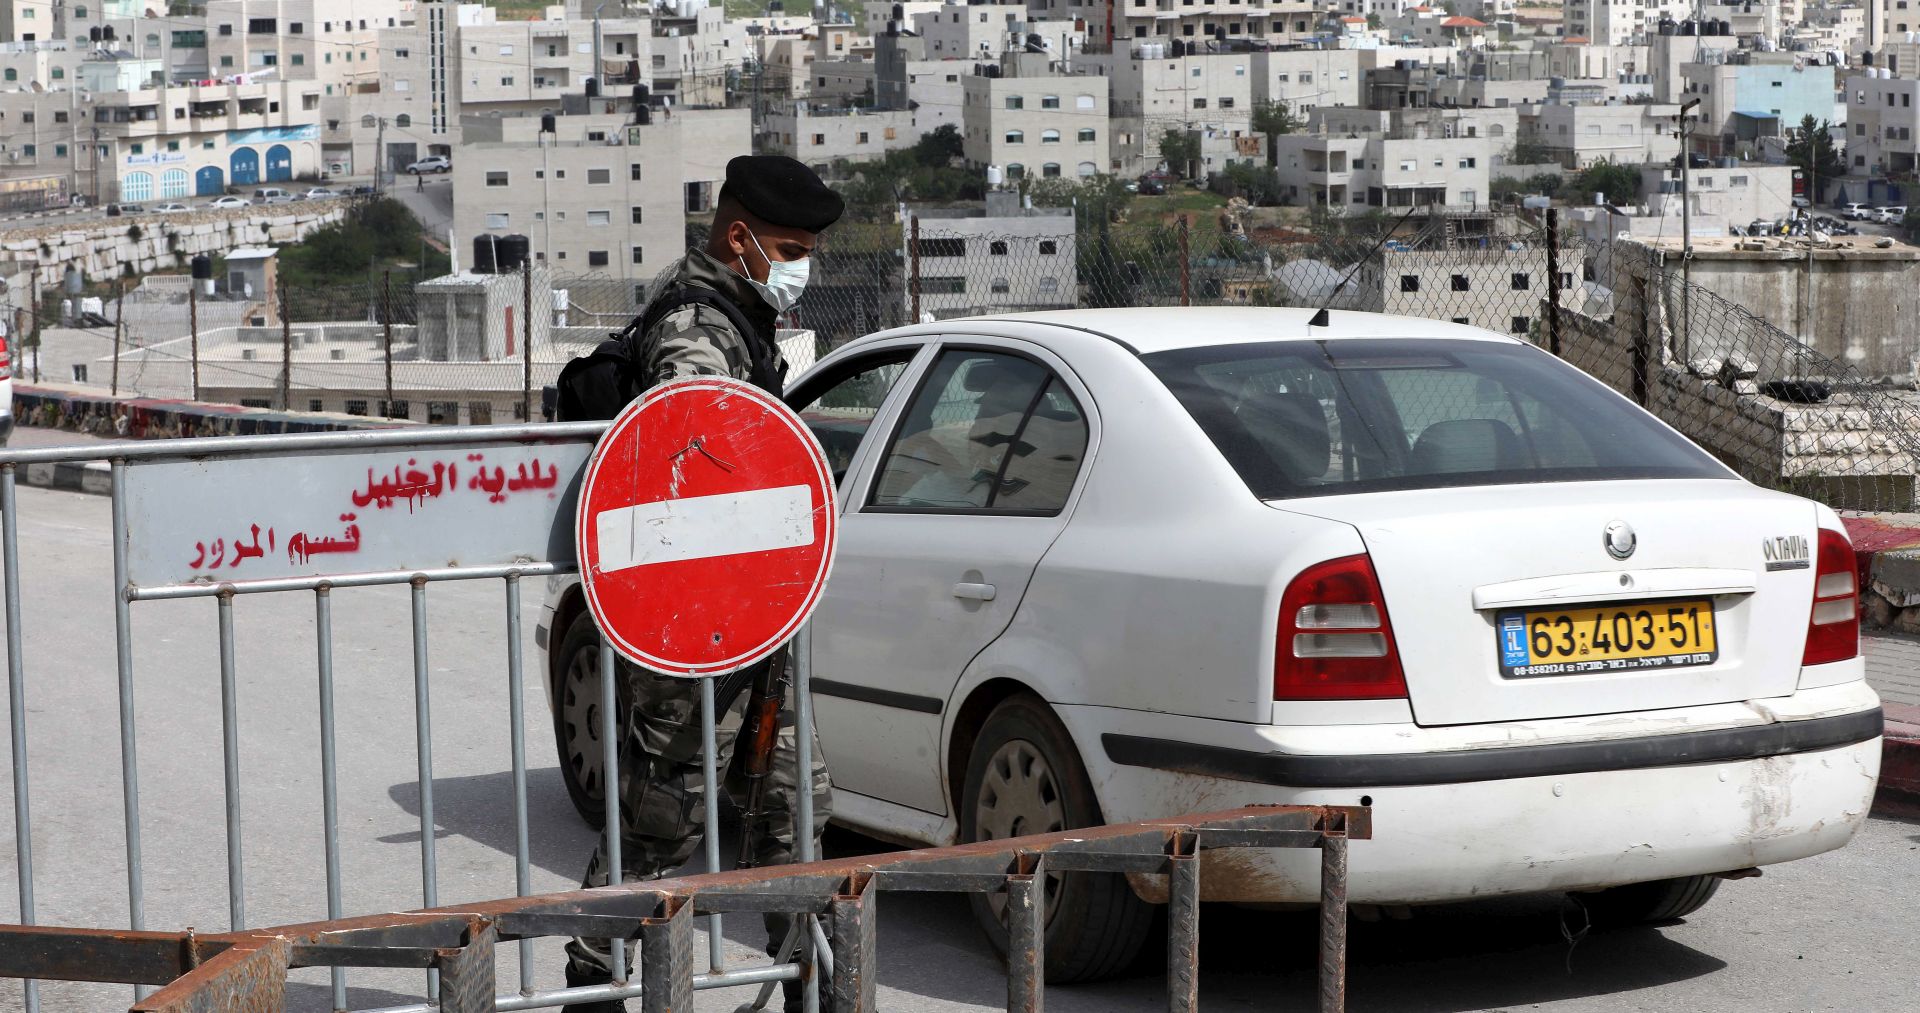 epa08371882 Palestinian security personnel opens a road at a checkpoint at an entrance to the West Bank city of Hebron, 19 April 2020. Palestinian authorities banned movement of people between cities to help stop the spread of the coronavirus which causes the Covid-19 disease.  EPA/ABED AL HASHLAMOUN